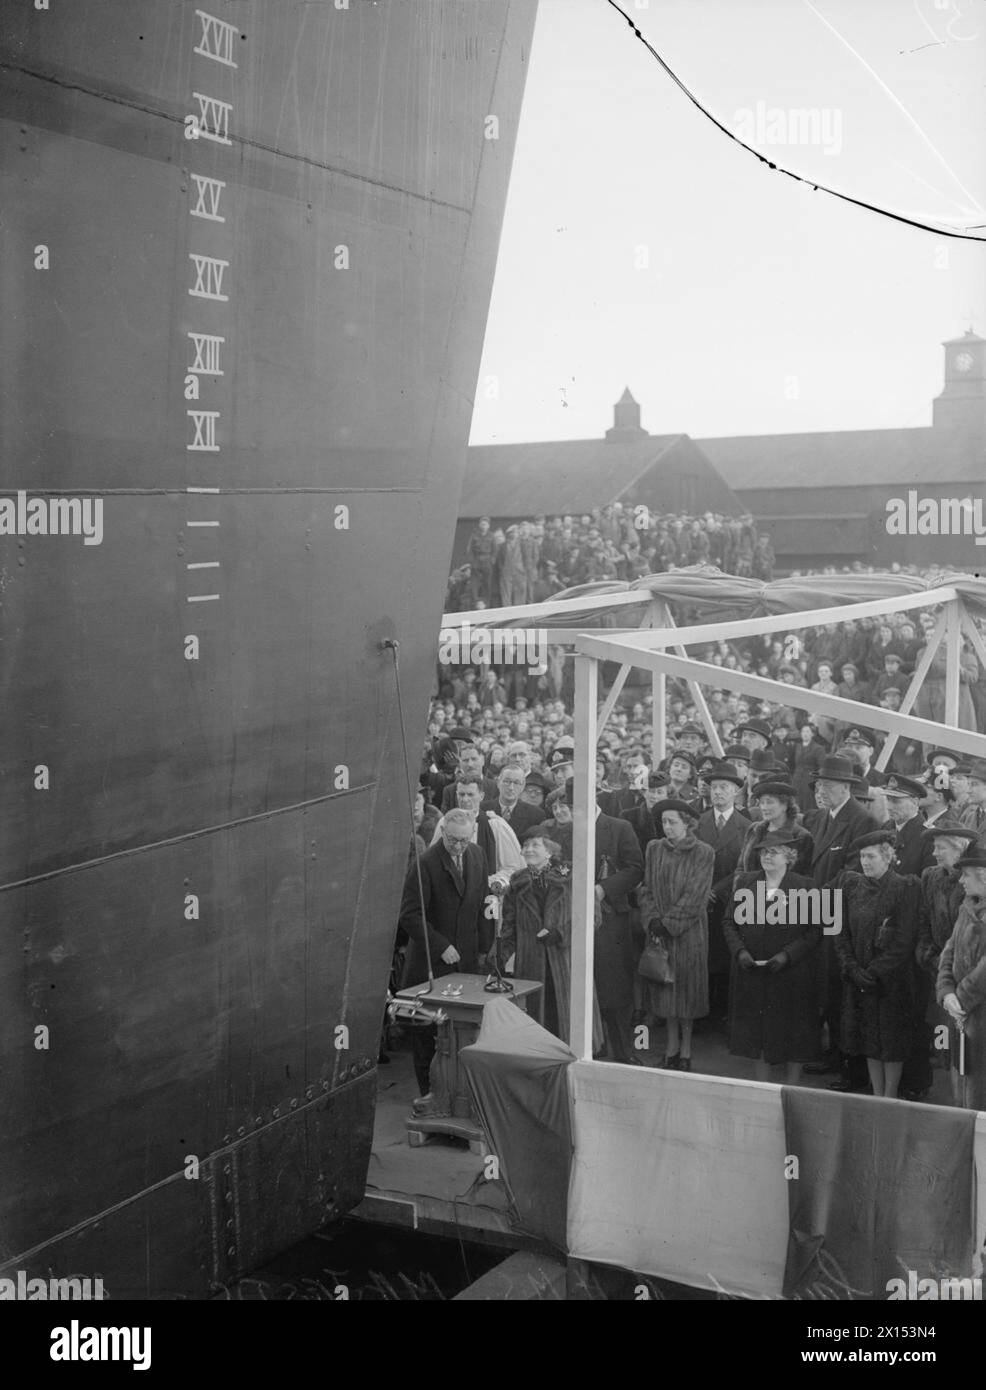 LAUNCH OF THE MAJESTIC. 28 FEBRUARY 1945, VICKERS-ARMSTRONG LTD, BARROW-IN-FURNESS. THE LAUNCH OF THE AIRCRAFT CARRIER HMS MAJESTIC BY LADY ANDERSON, WIFE OF THE RT HON SIR JOHN ANDERSON. - Lady Anderson names the carrier Stock Photo